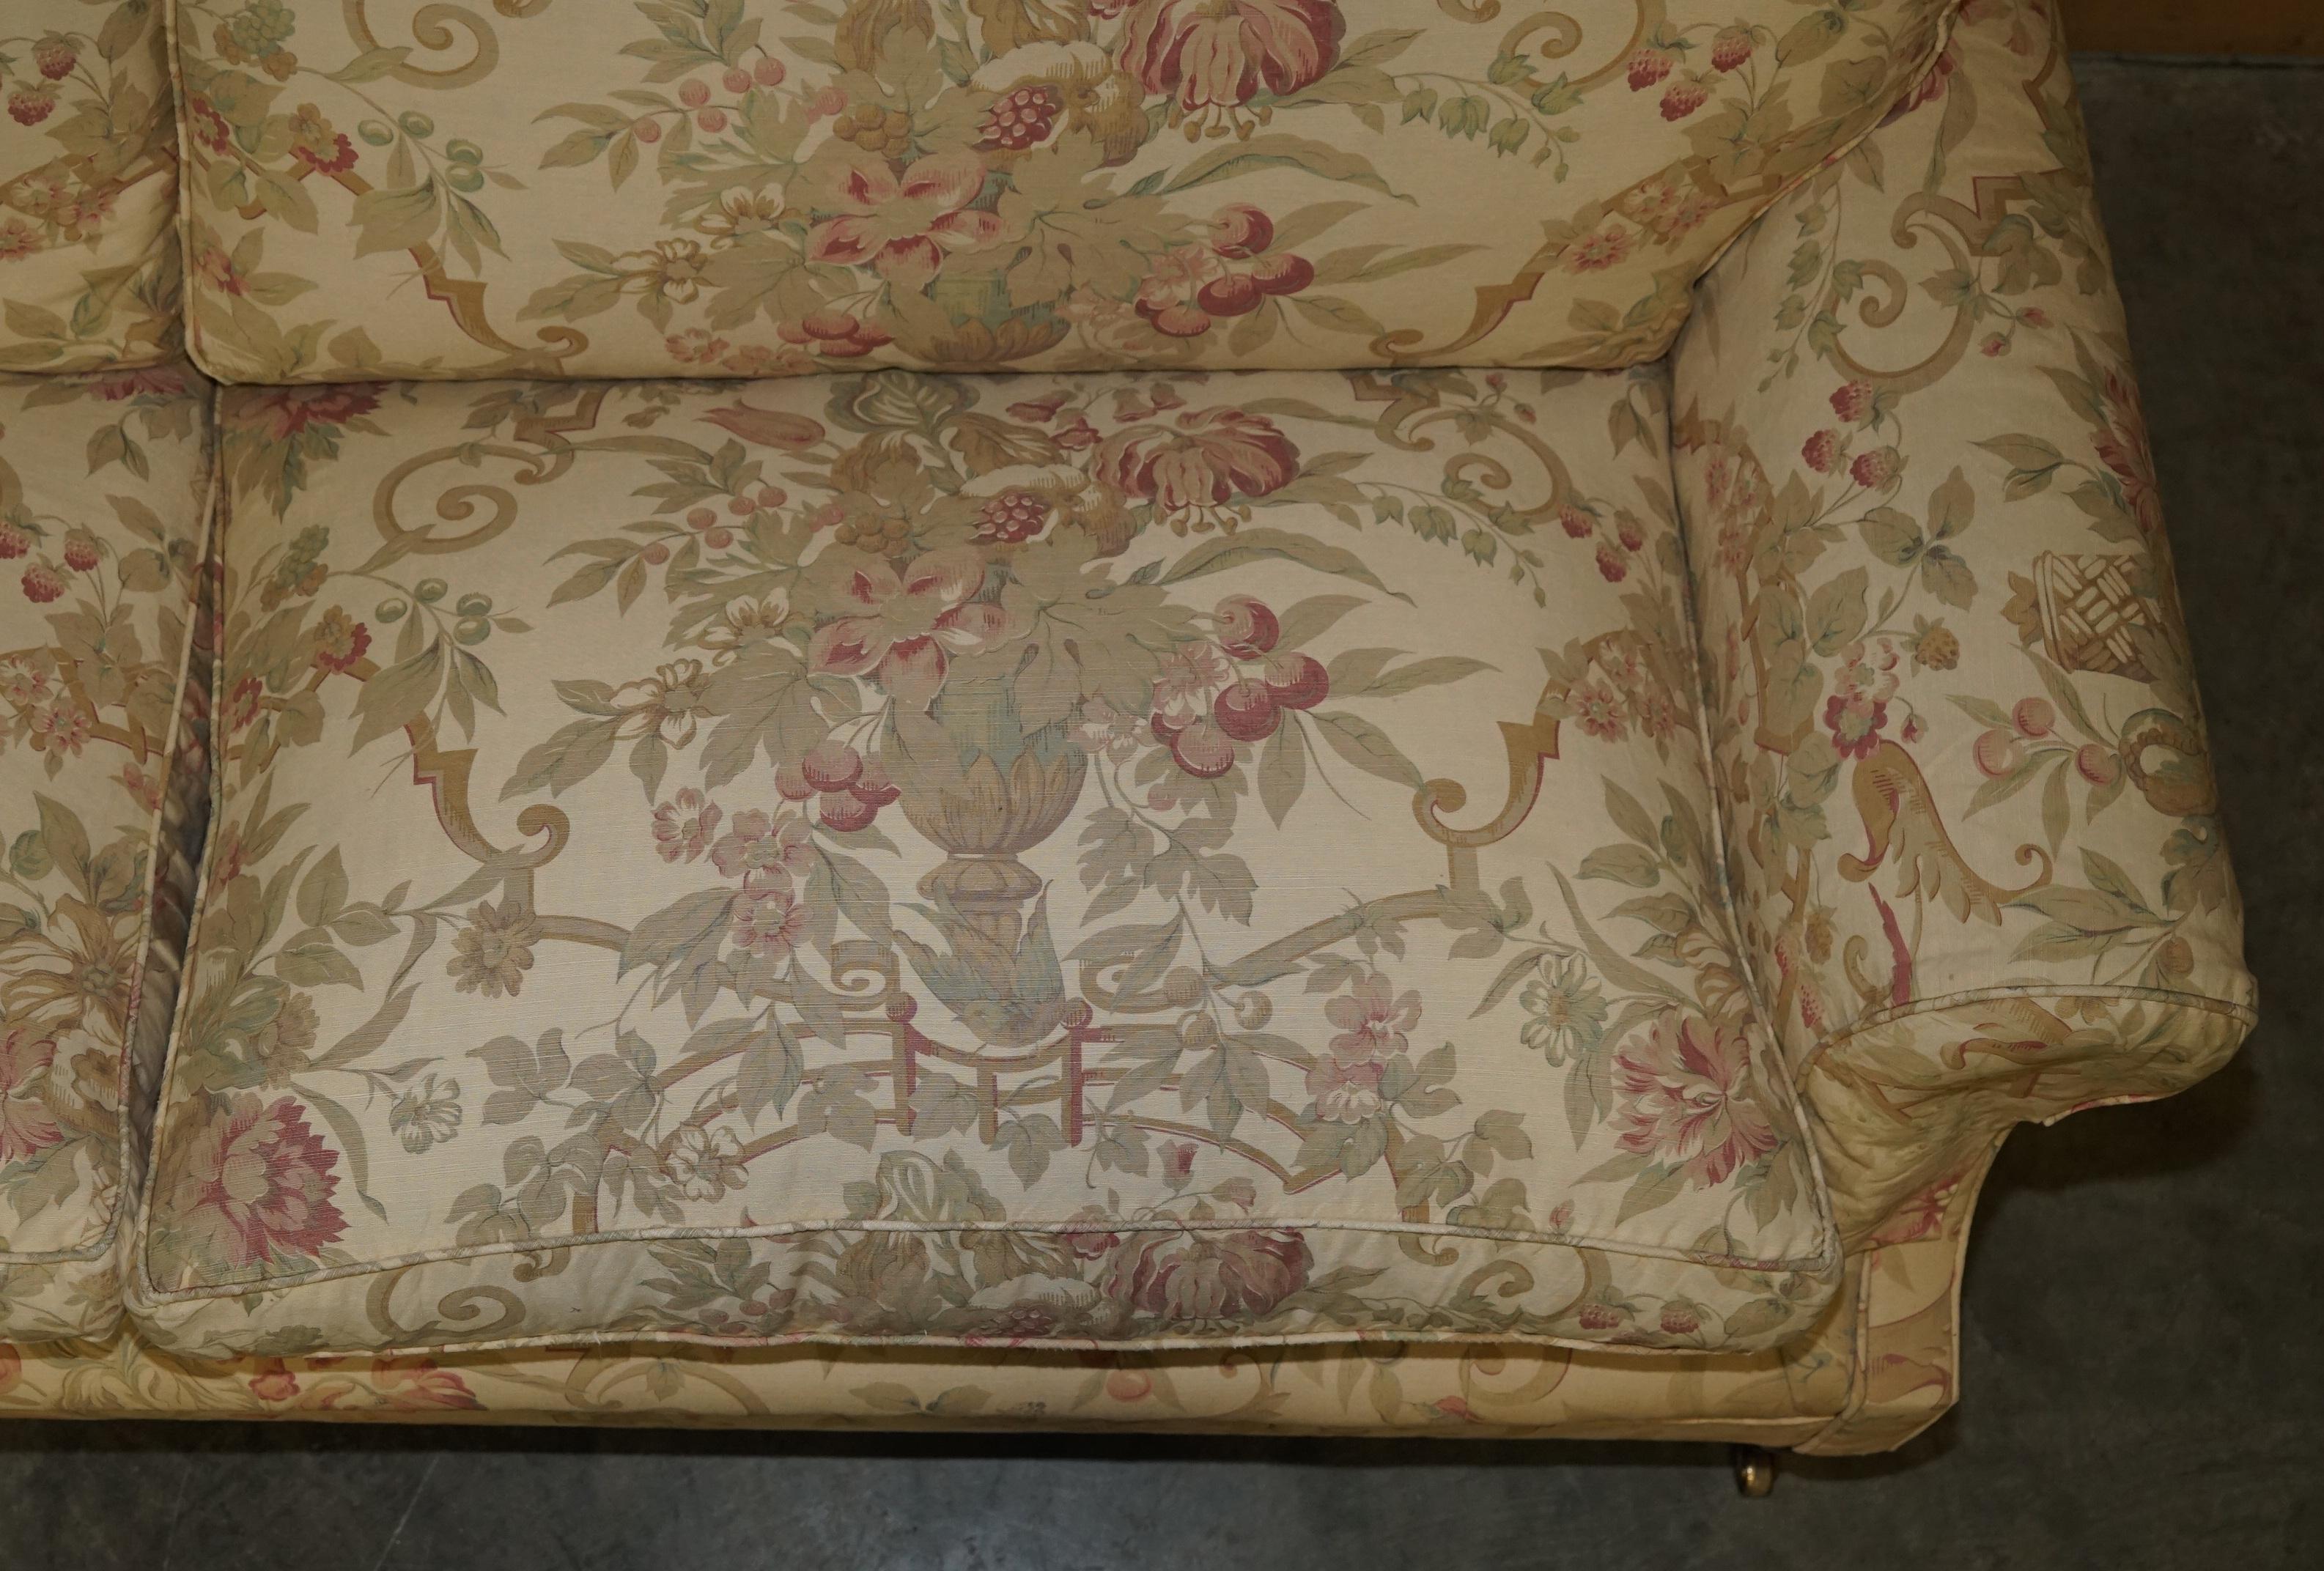 GEORGE SMITH CHELSEA 3 SEAT SOFA IN ORIGINAL UPHOLSTERY PART SUiTE For Sale 2